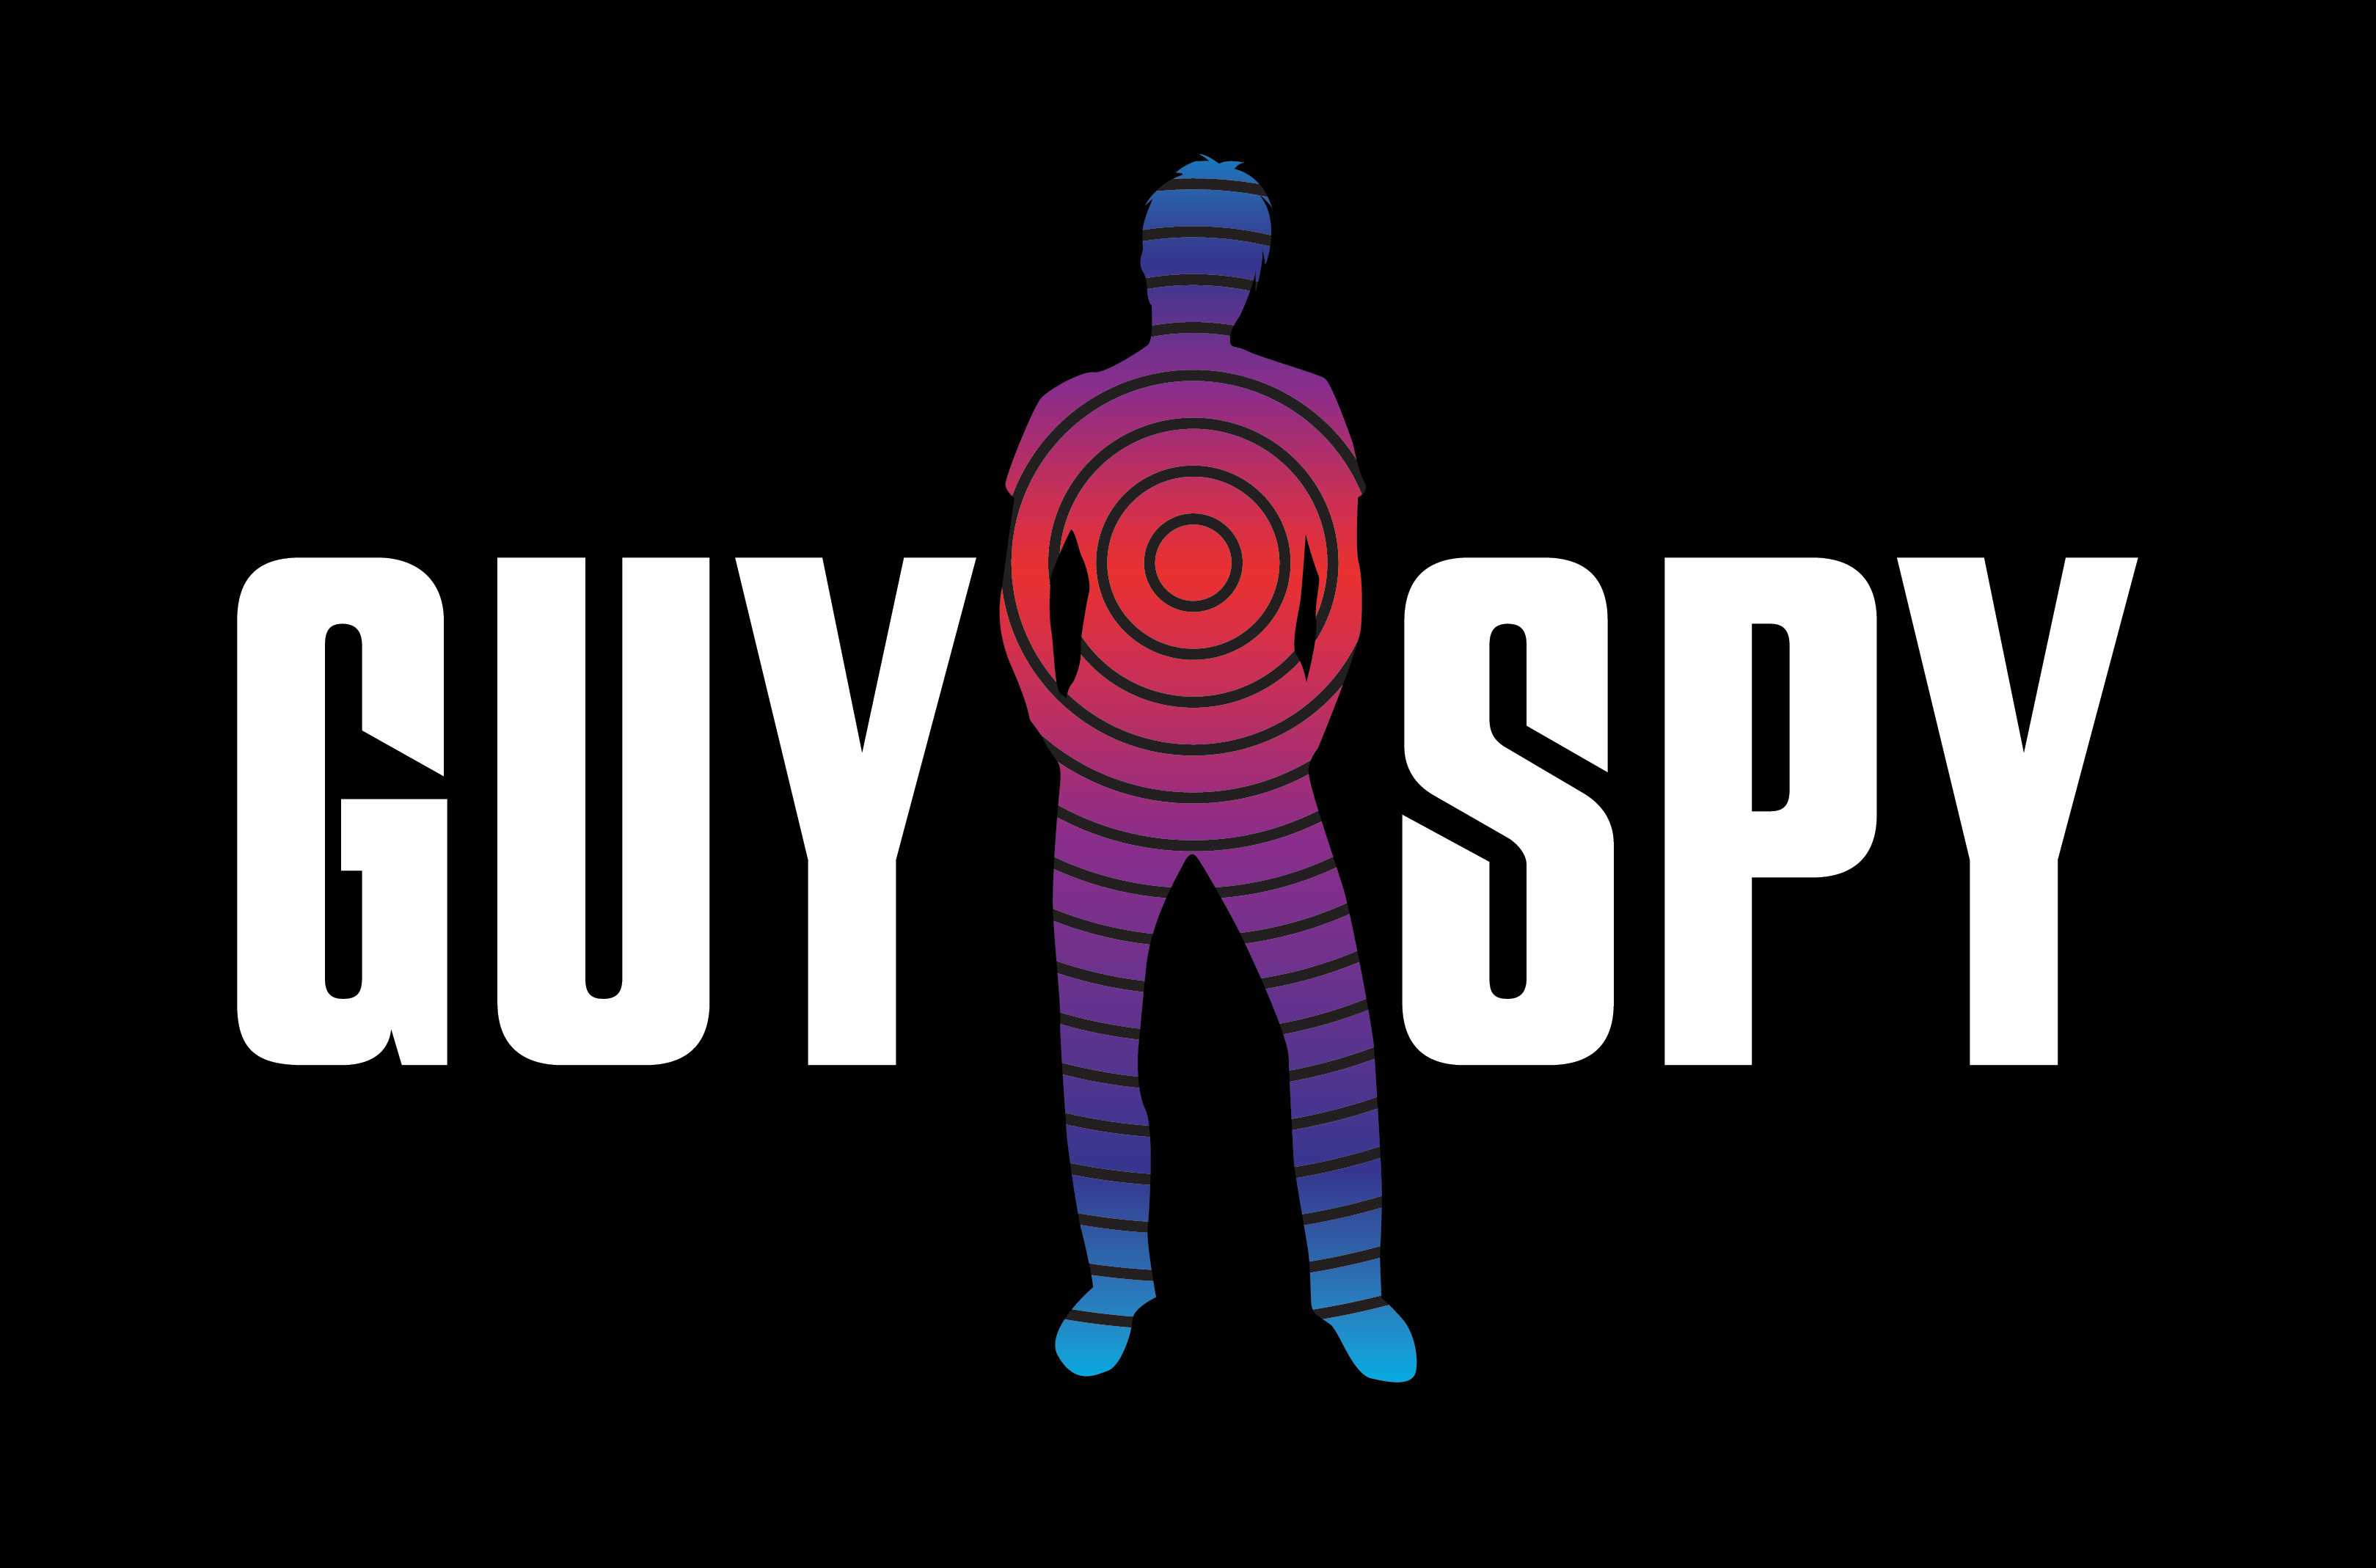 android gay chat app spyware